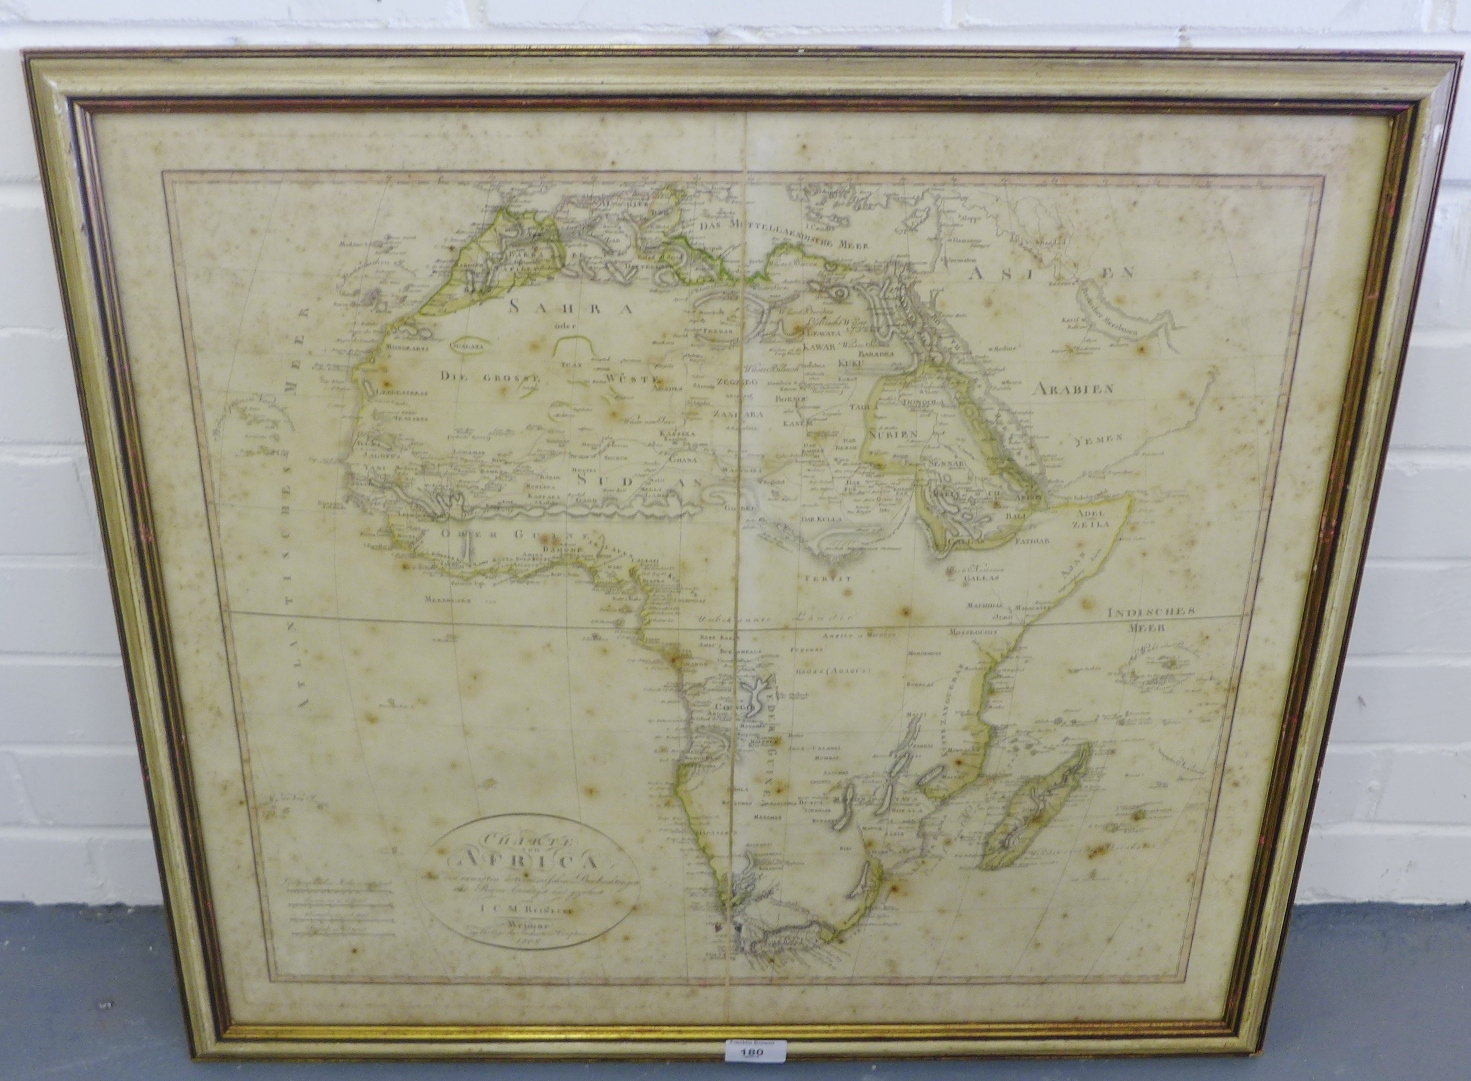 Early 19th century hand coloured map - Charte von Africa by I.C.M Reinecke, published Weimar 1802,